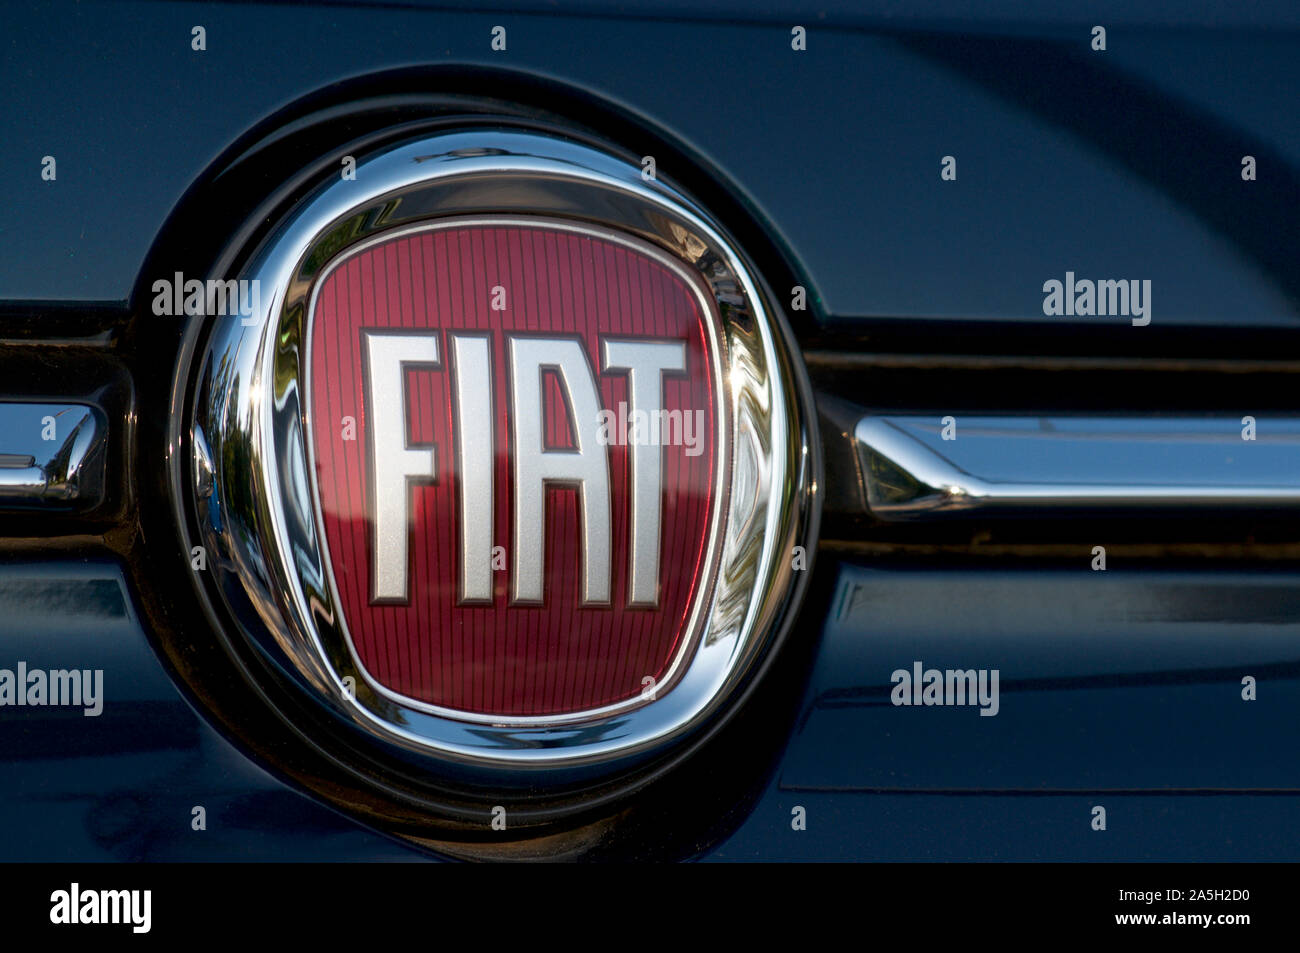 Vezia, Ticino, Switzerland - 7th October 2019 : Close up picture of the Fiat logo placed on a cars hood Stock Photo